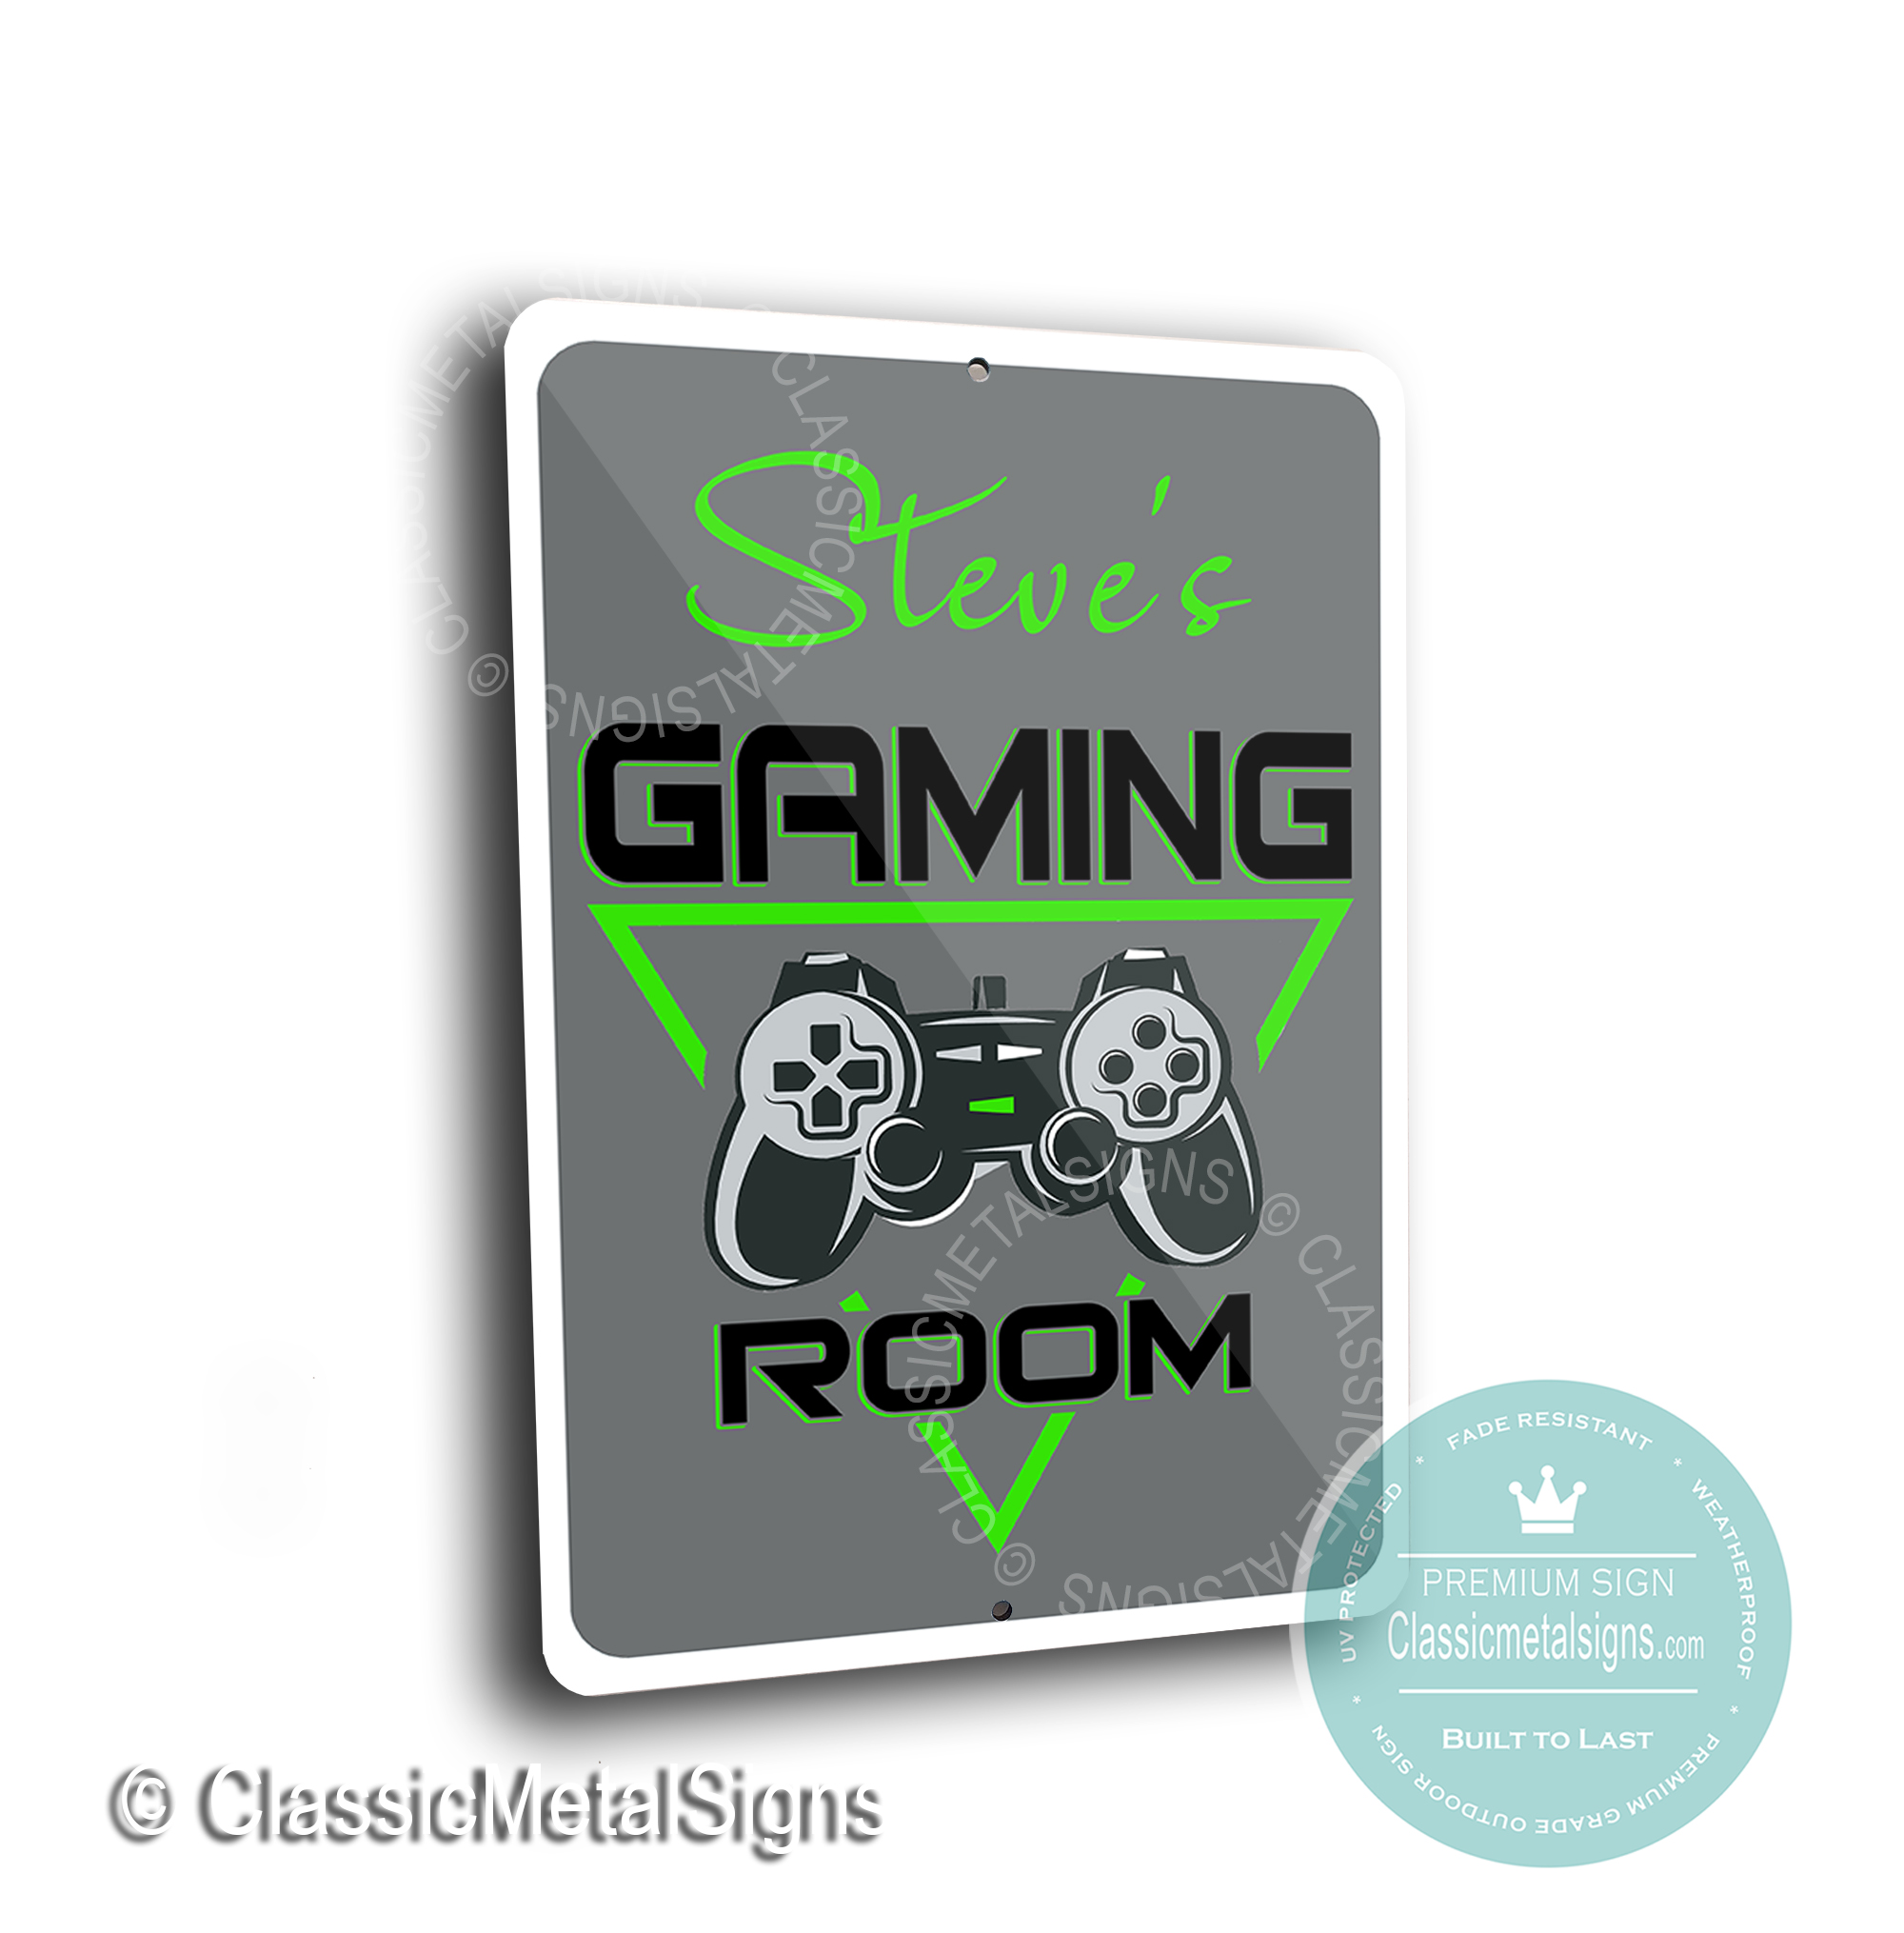 Details about   Personalized Aluminum Game Room Sign Video Game Arcade Playroom Metal Decor 